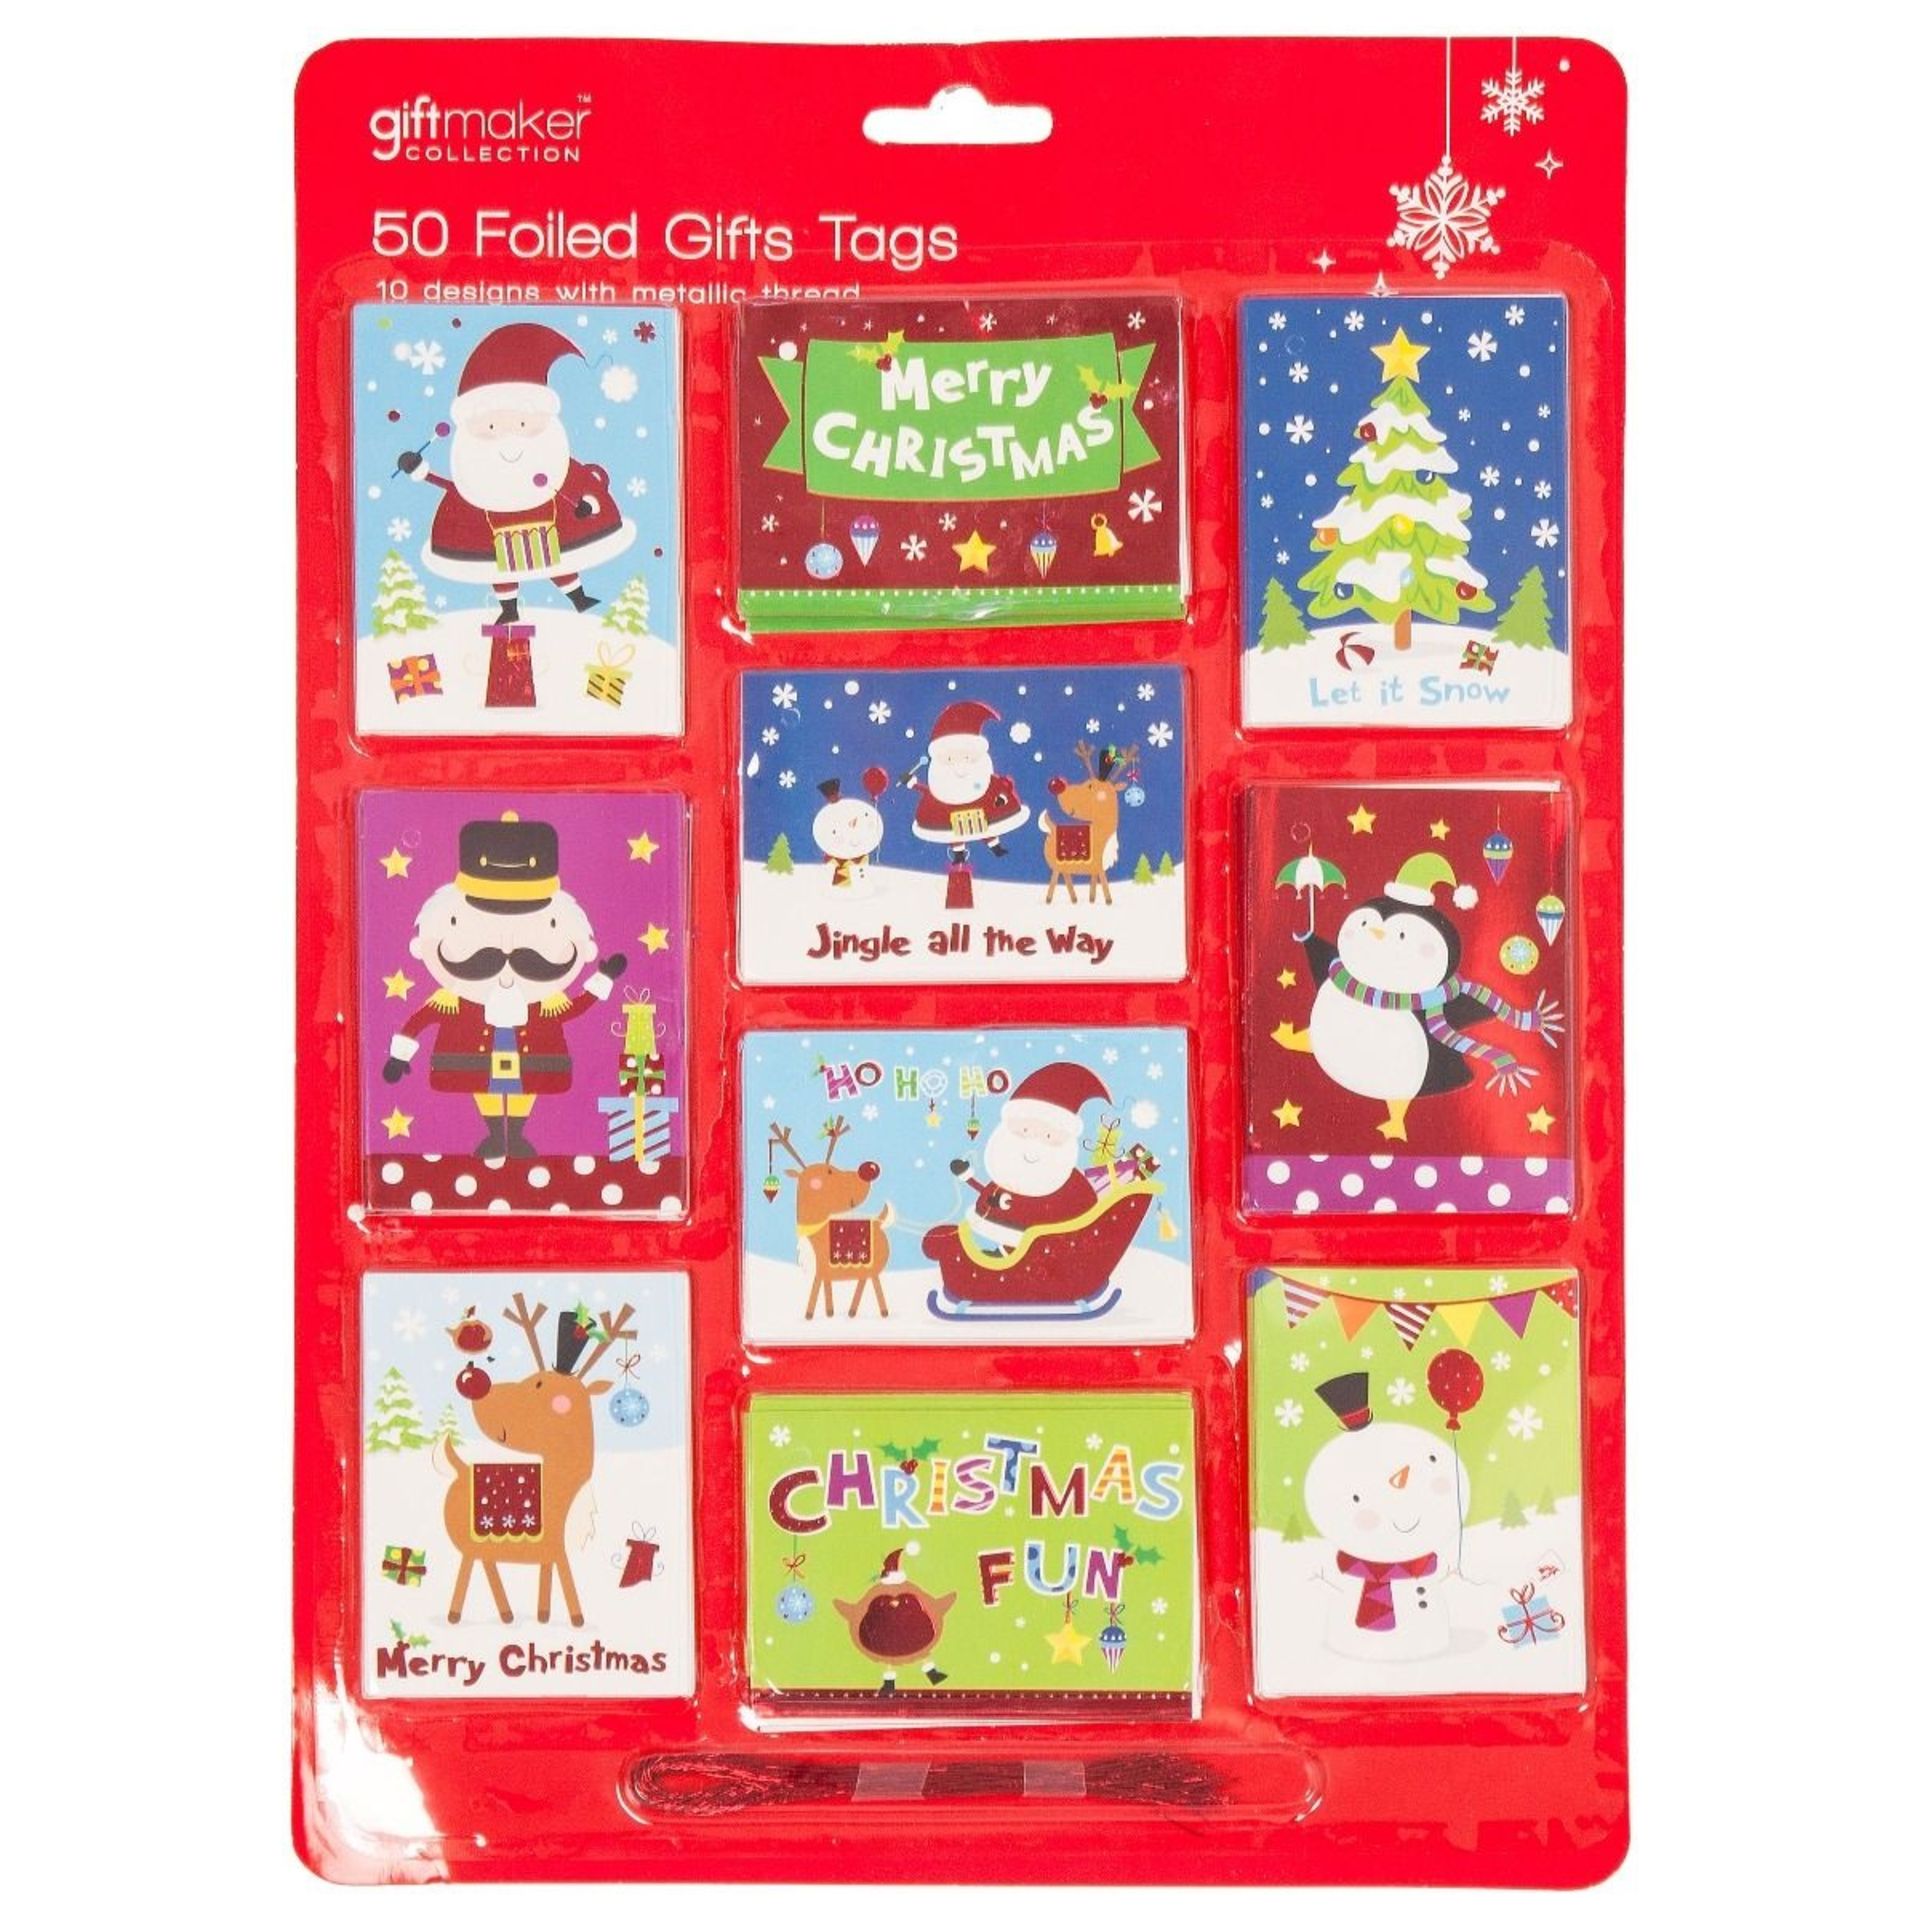 500 x Assorted Christmas Gift Wrap, Tags, Décor, Bunting |RRP £1 - £3.99 each - Image 4 of 4